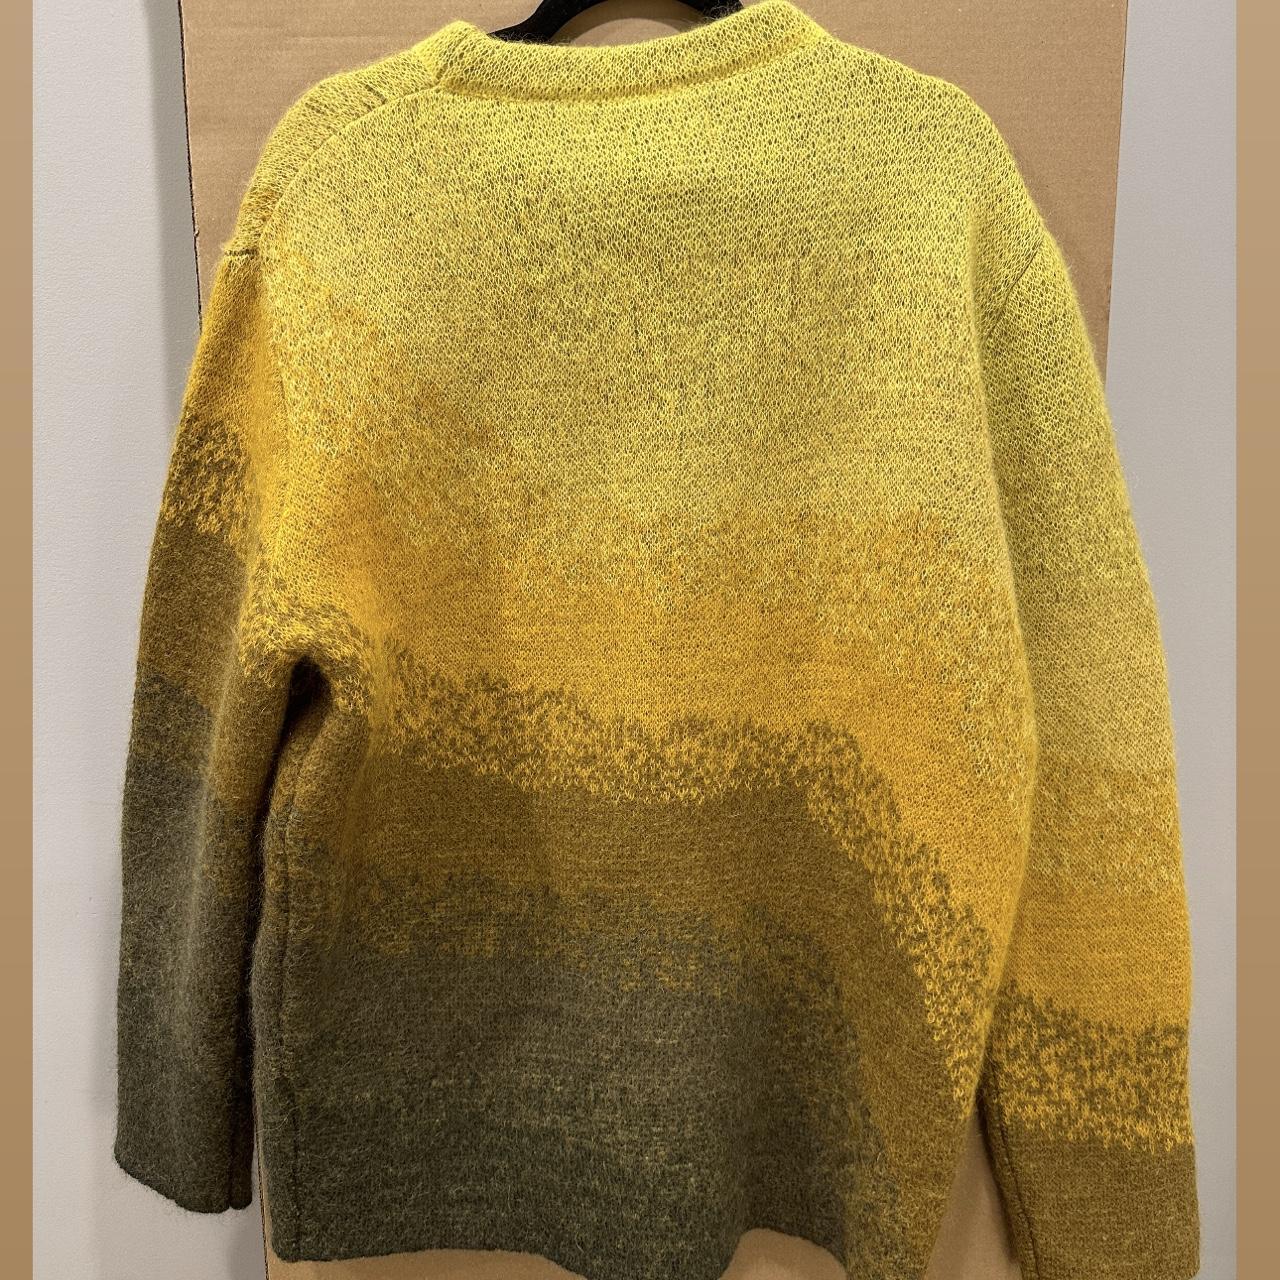 ERL Yellow Gradient Mohair Bowy Sweater, Like New/